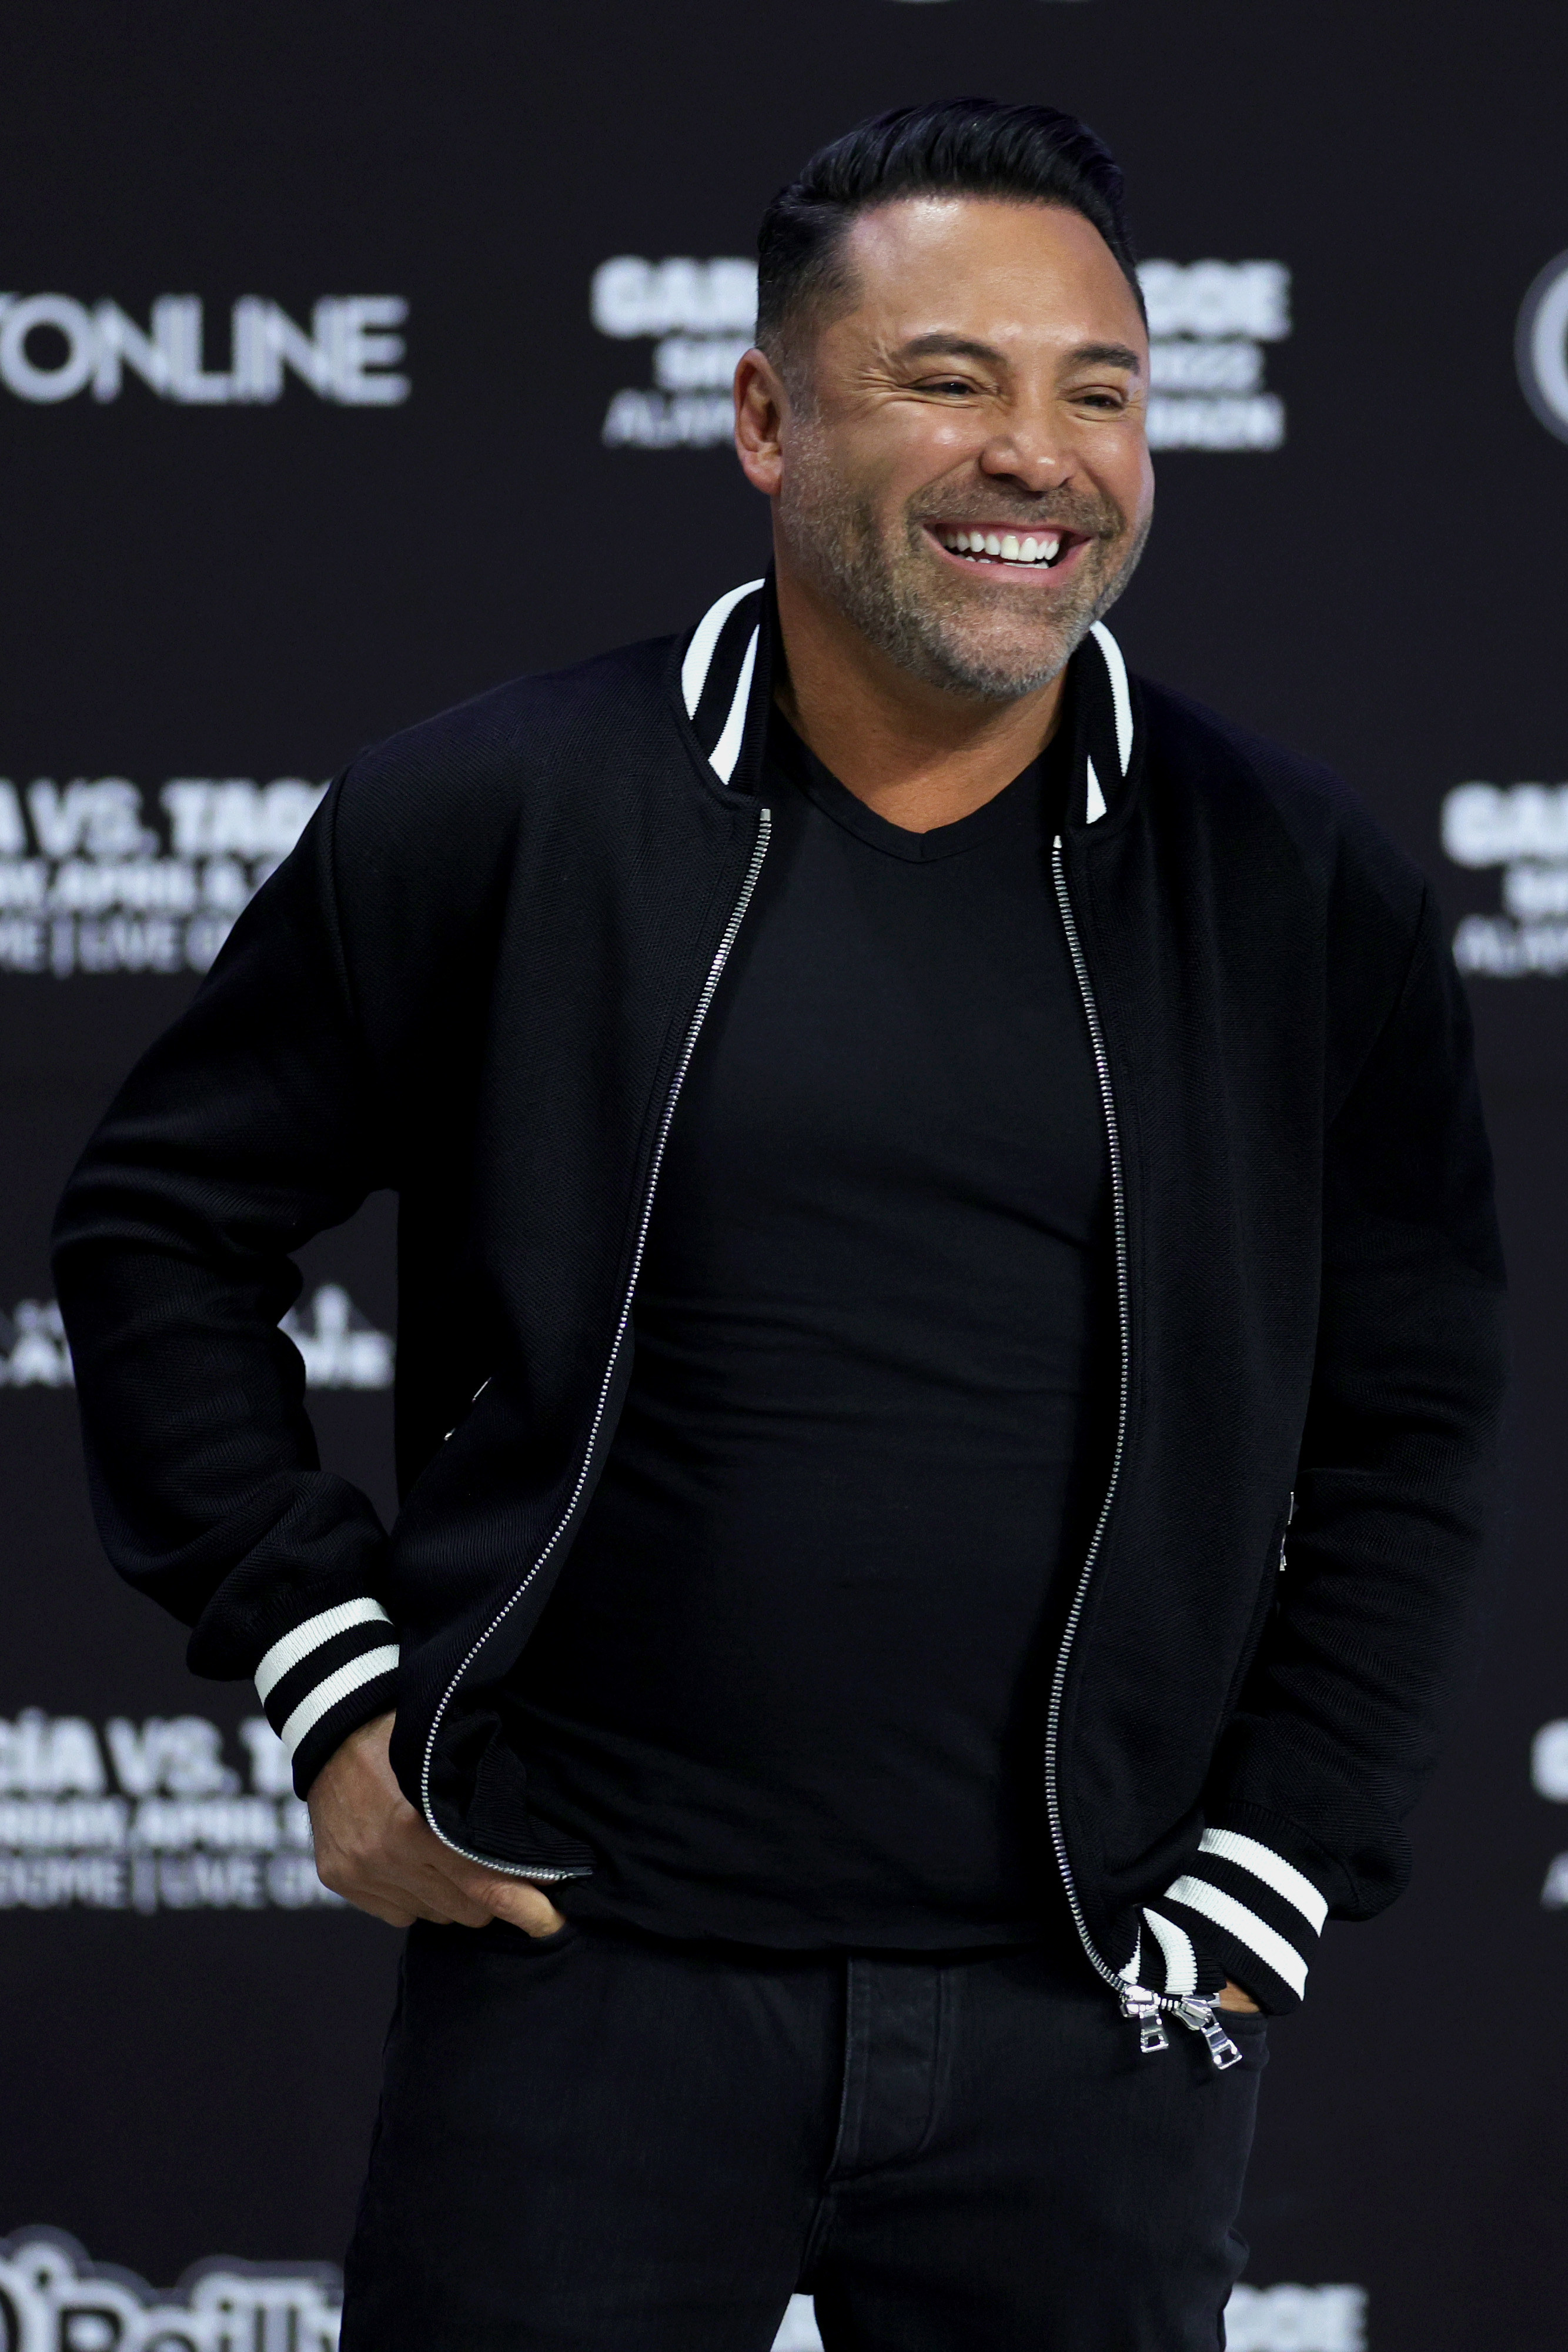 Oscar De La Hoya is seen onstage during official his weigh-in&#x27;s at the Alamodome on April 08, 2022